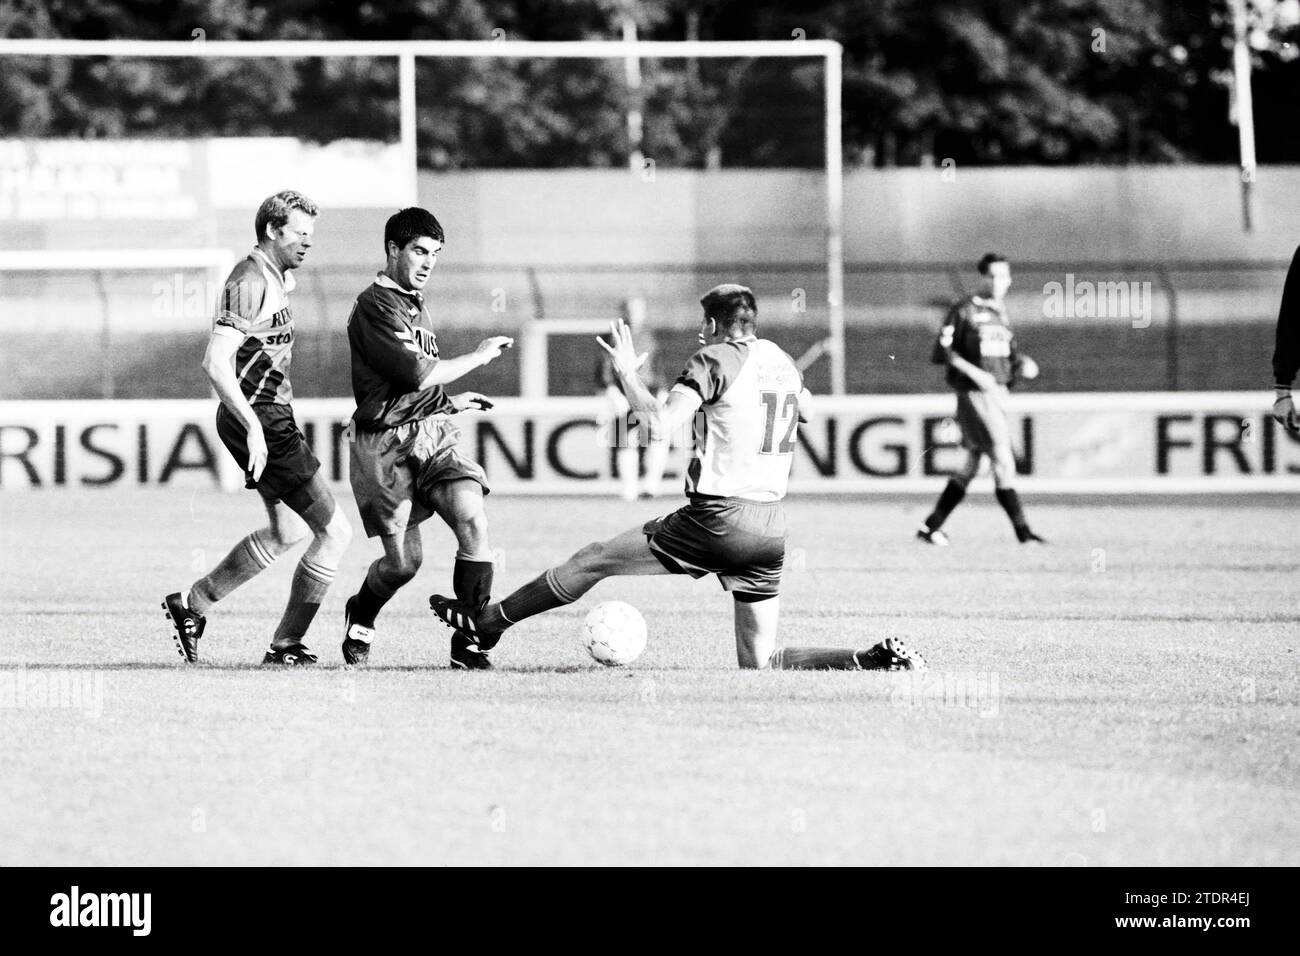 Football, Haarlem - AFC '34, 11-08-1997, Whizgle News from the Past, Tailored for the Future. Explore historical narratives, Dutch The Netherlands agency image with a modern perspective, bridging the gap between yesterday's events and tomorrow's insights. A timeless journey shaping the stories that shape our future Stock Photo